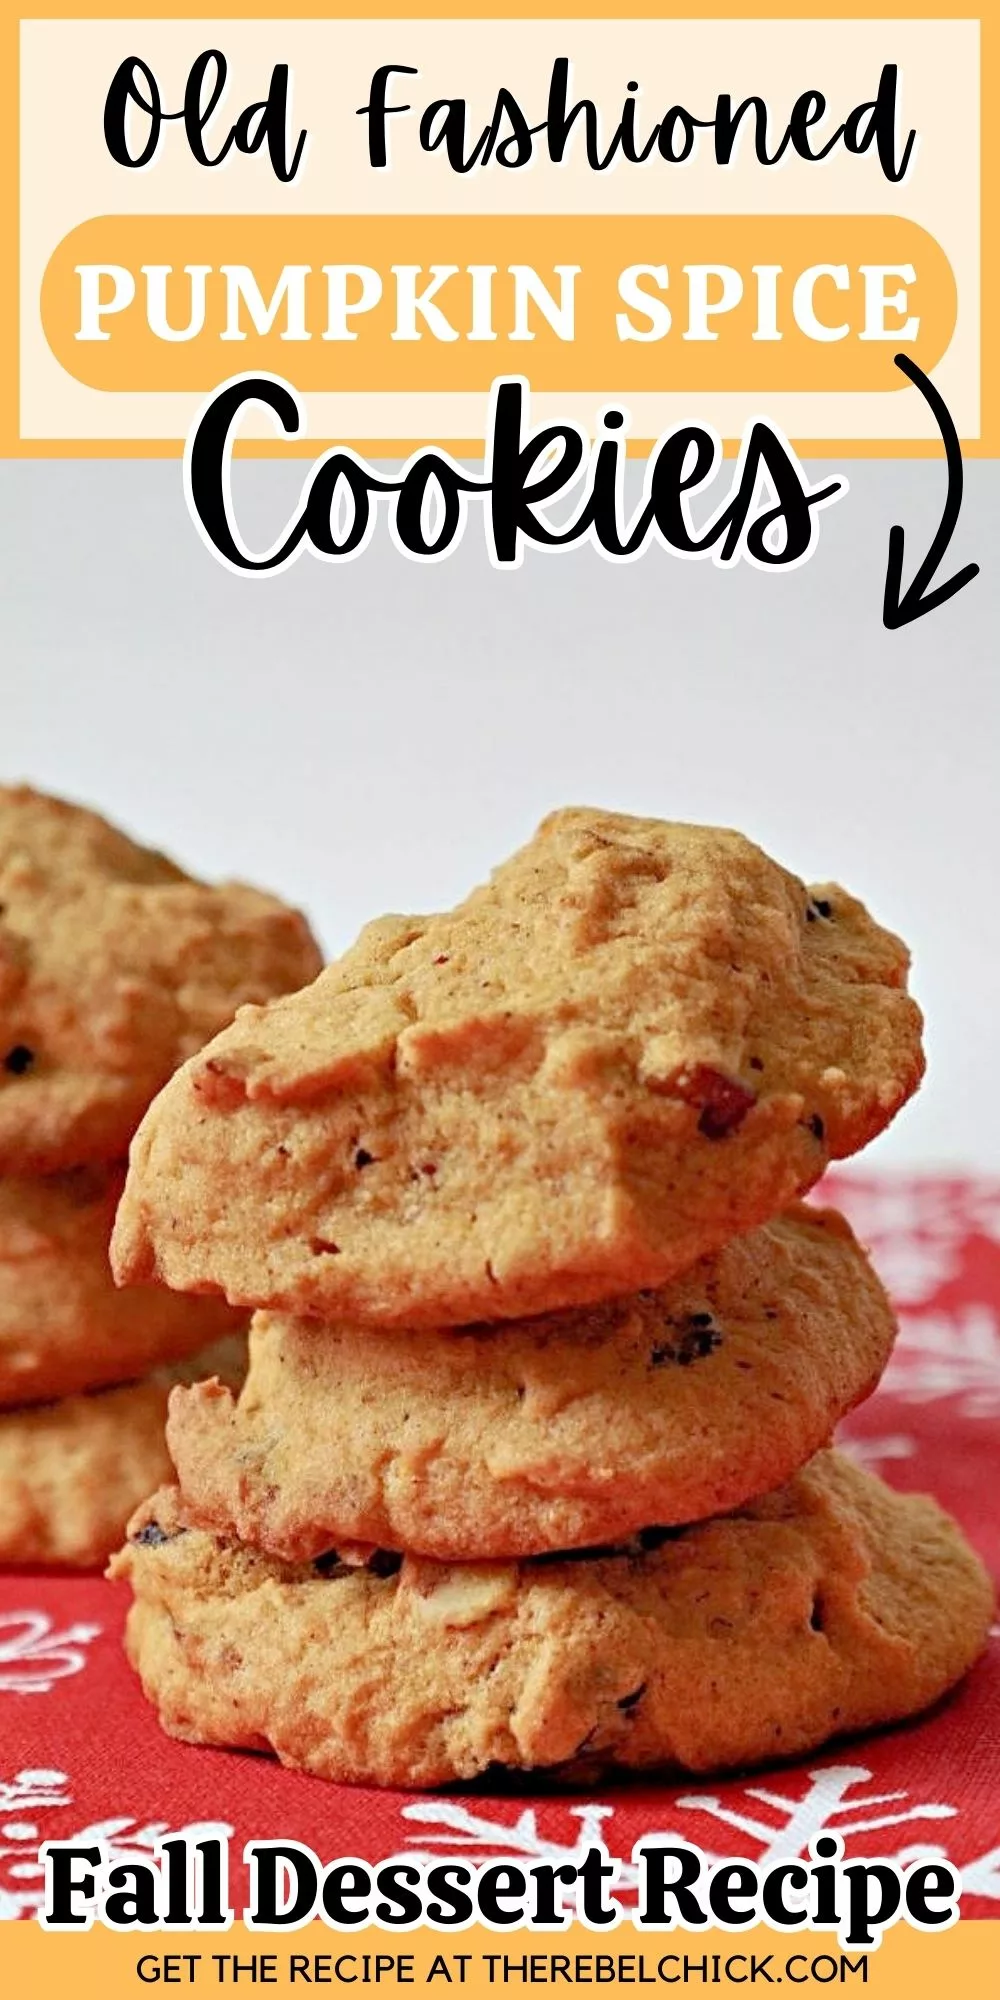 Old Fashioned Pumpkin Spice Cookies